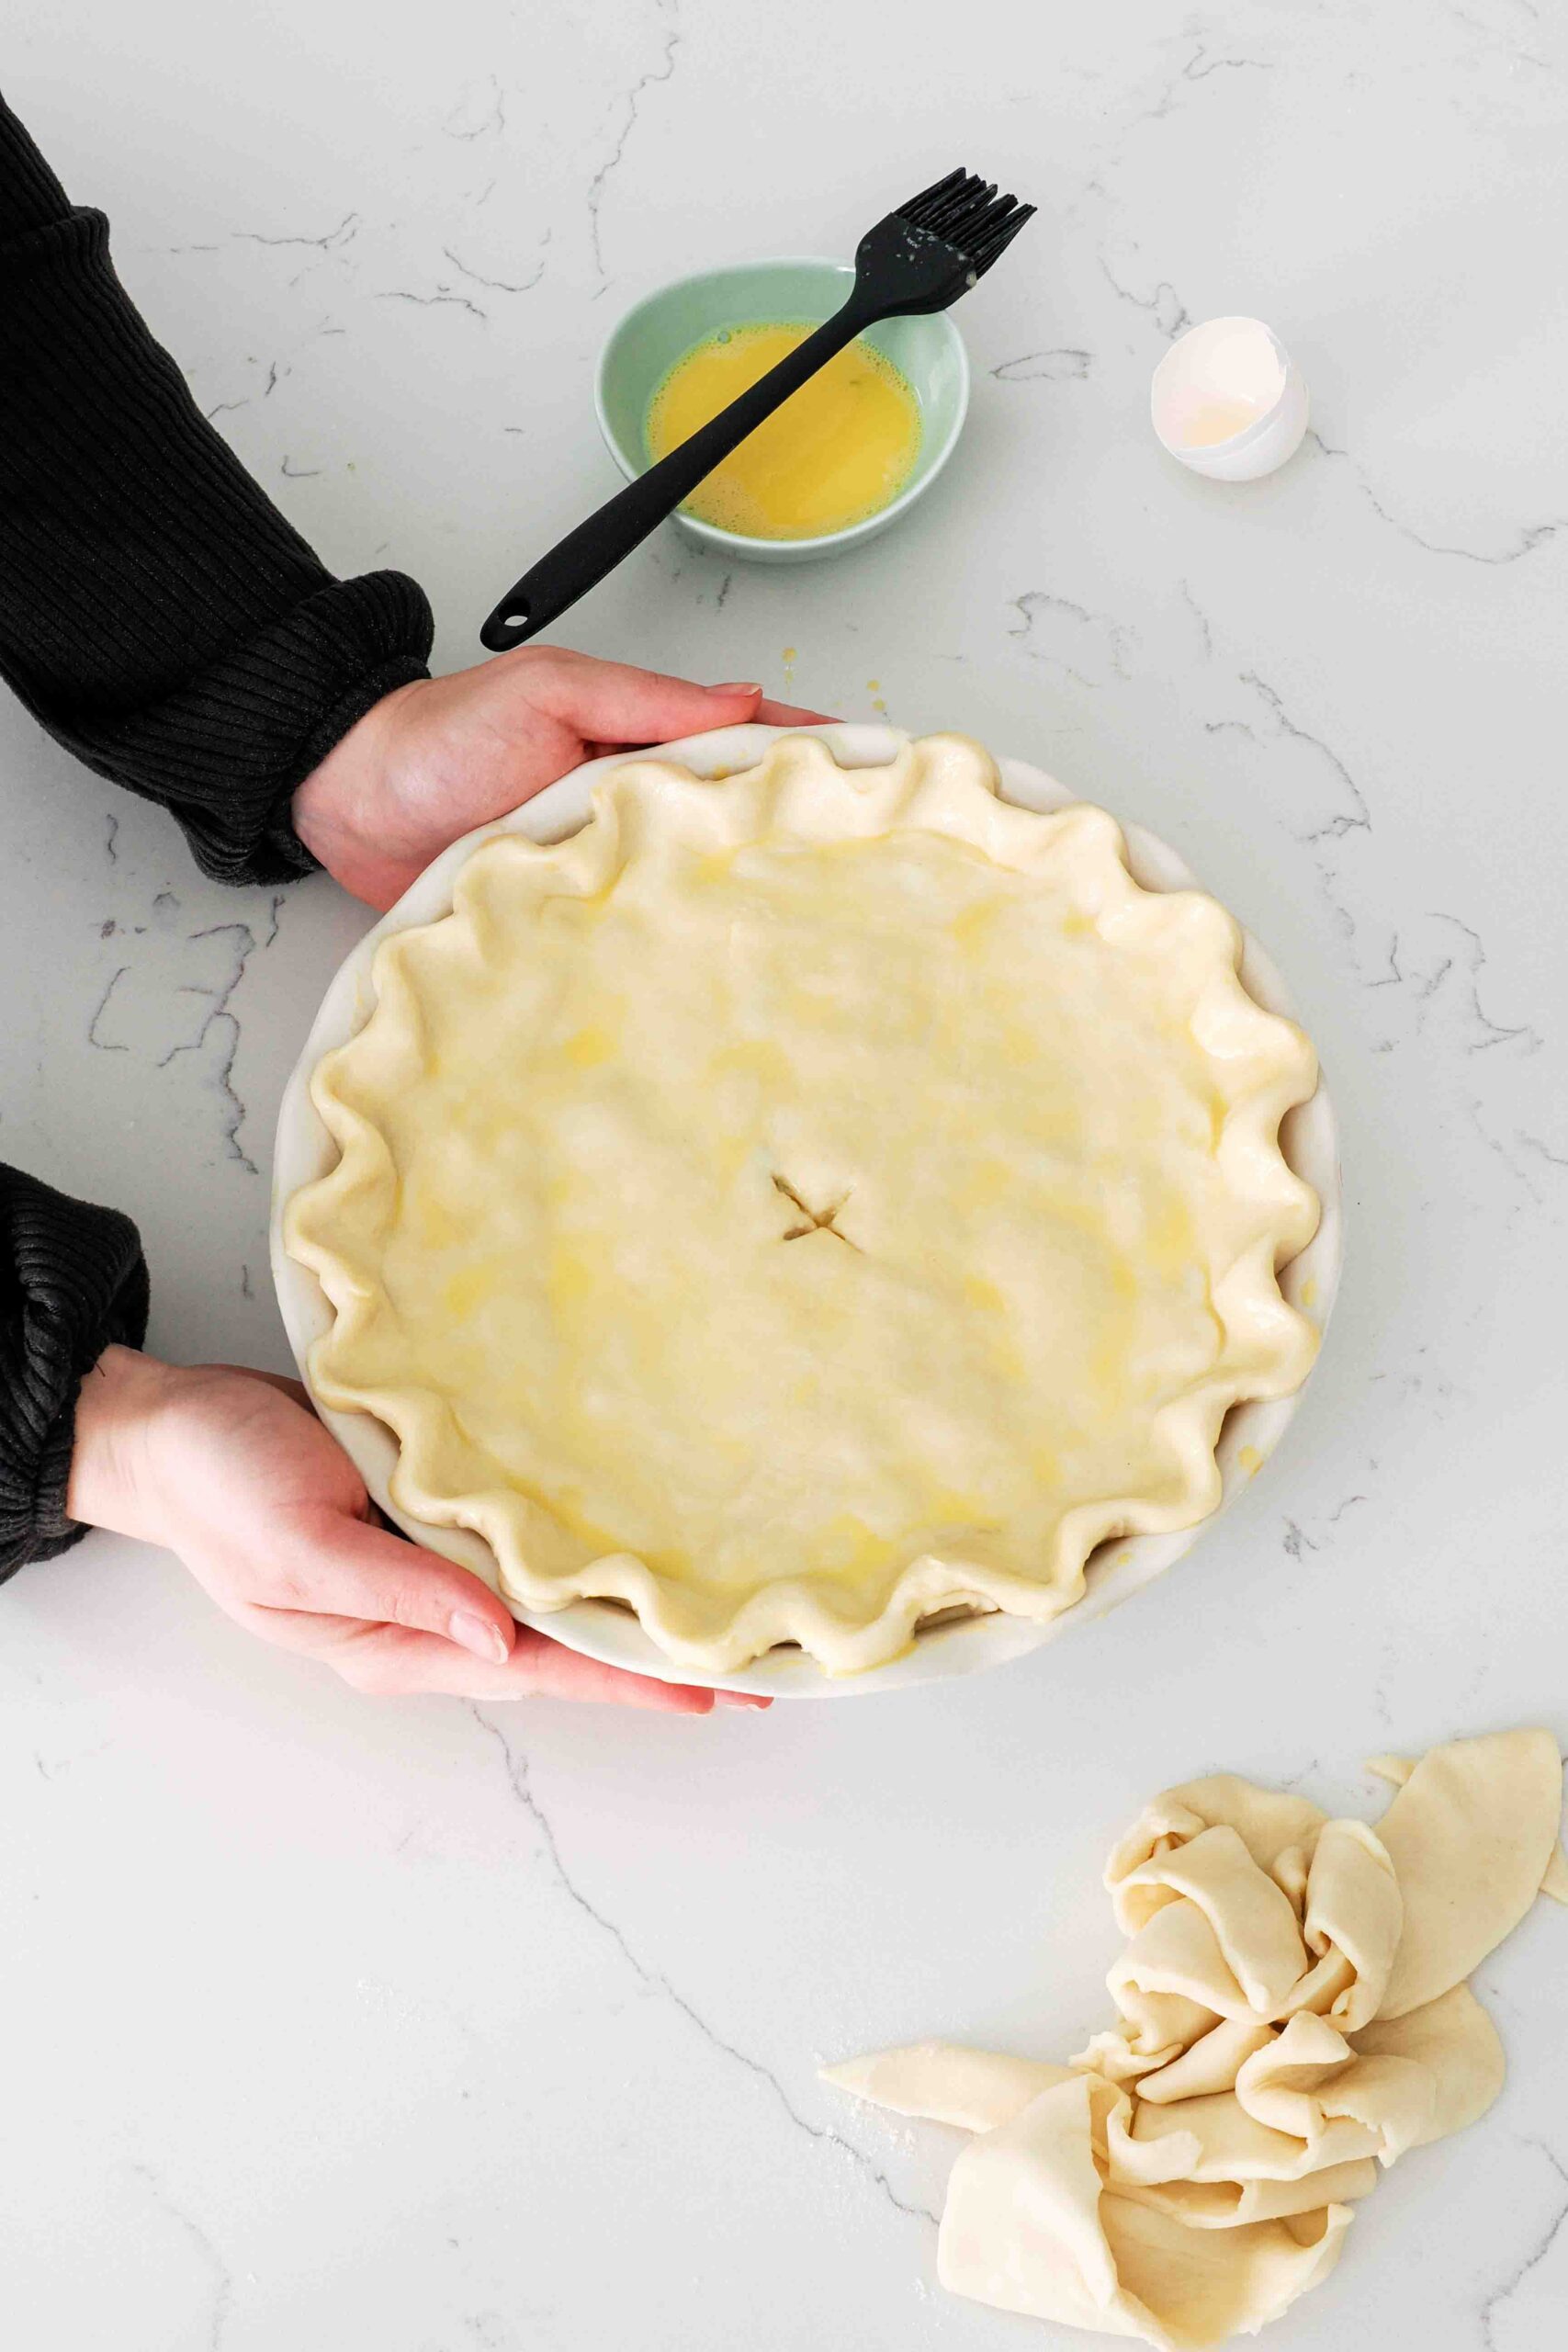 Two hands move an unbaked and egg-washed pie on a counter.